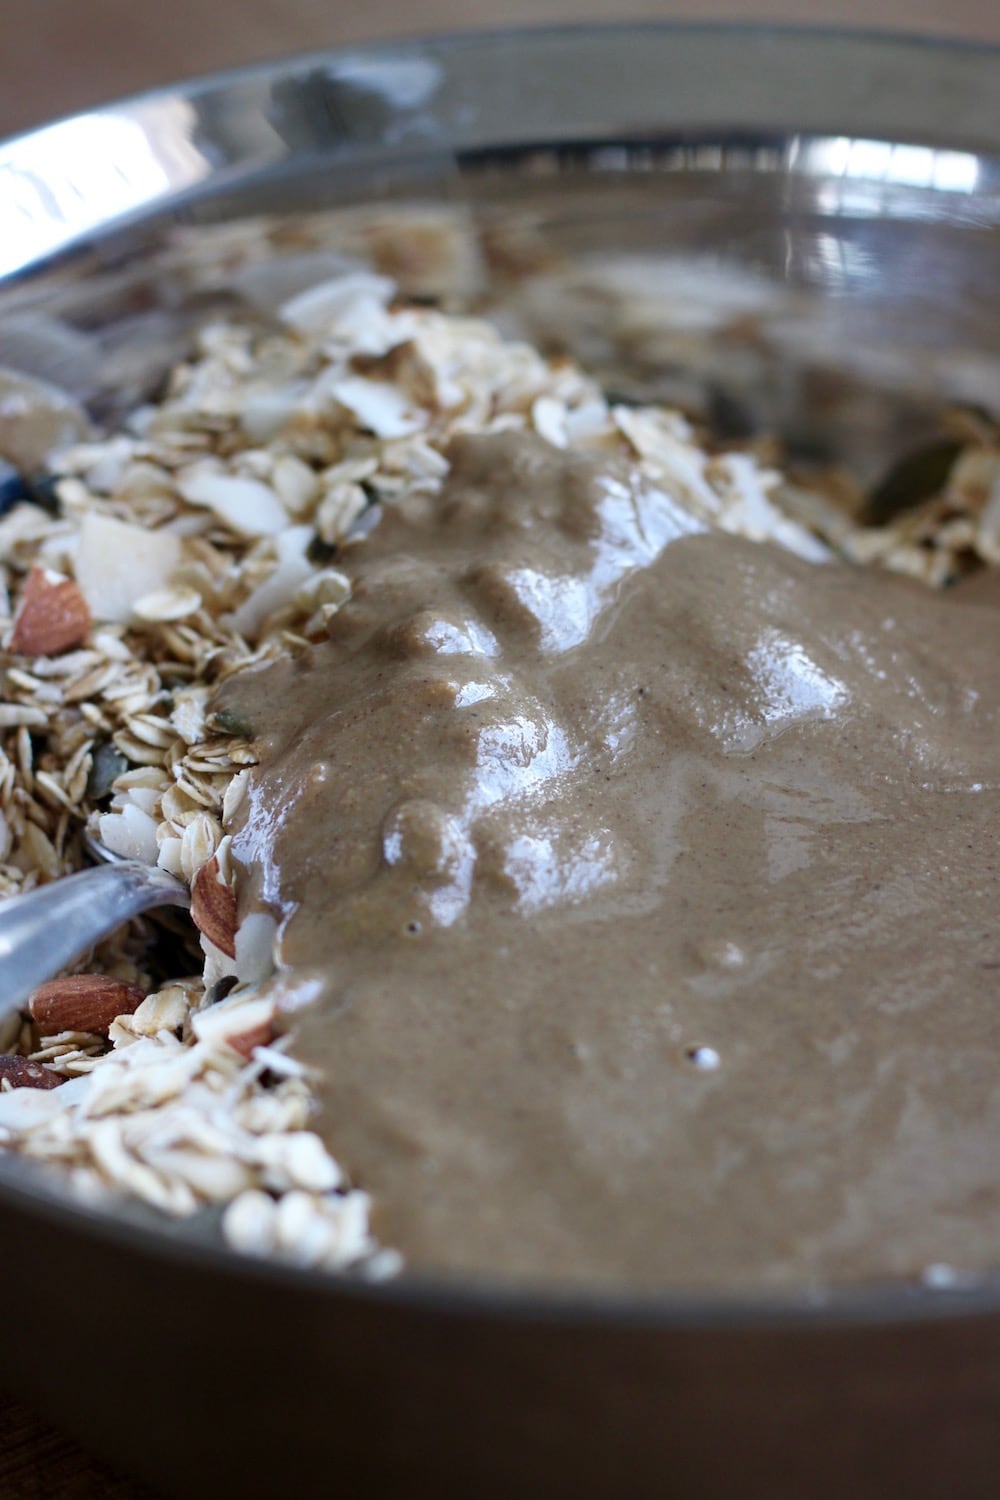 tahini added to the mix of dry ingredients